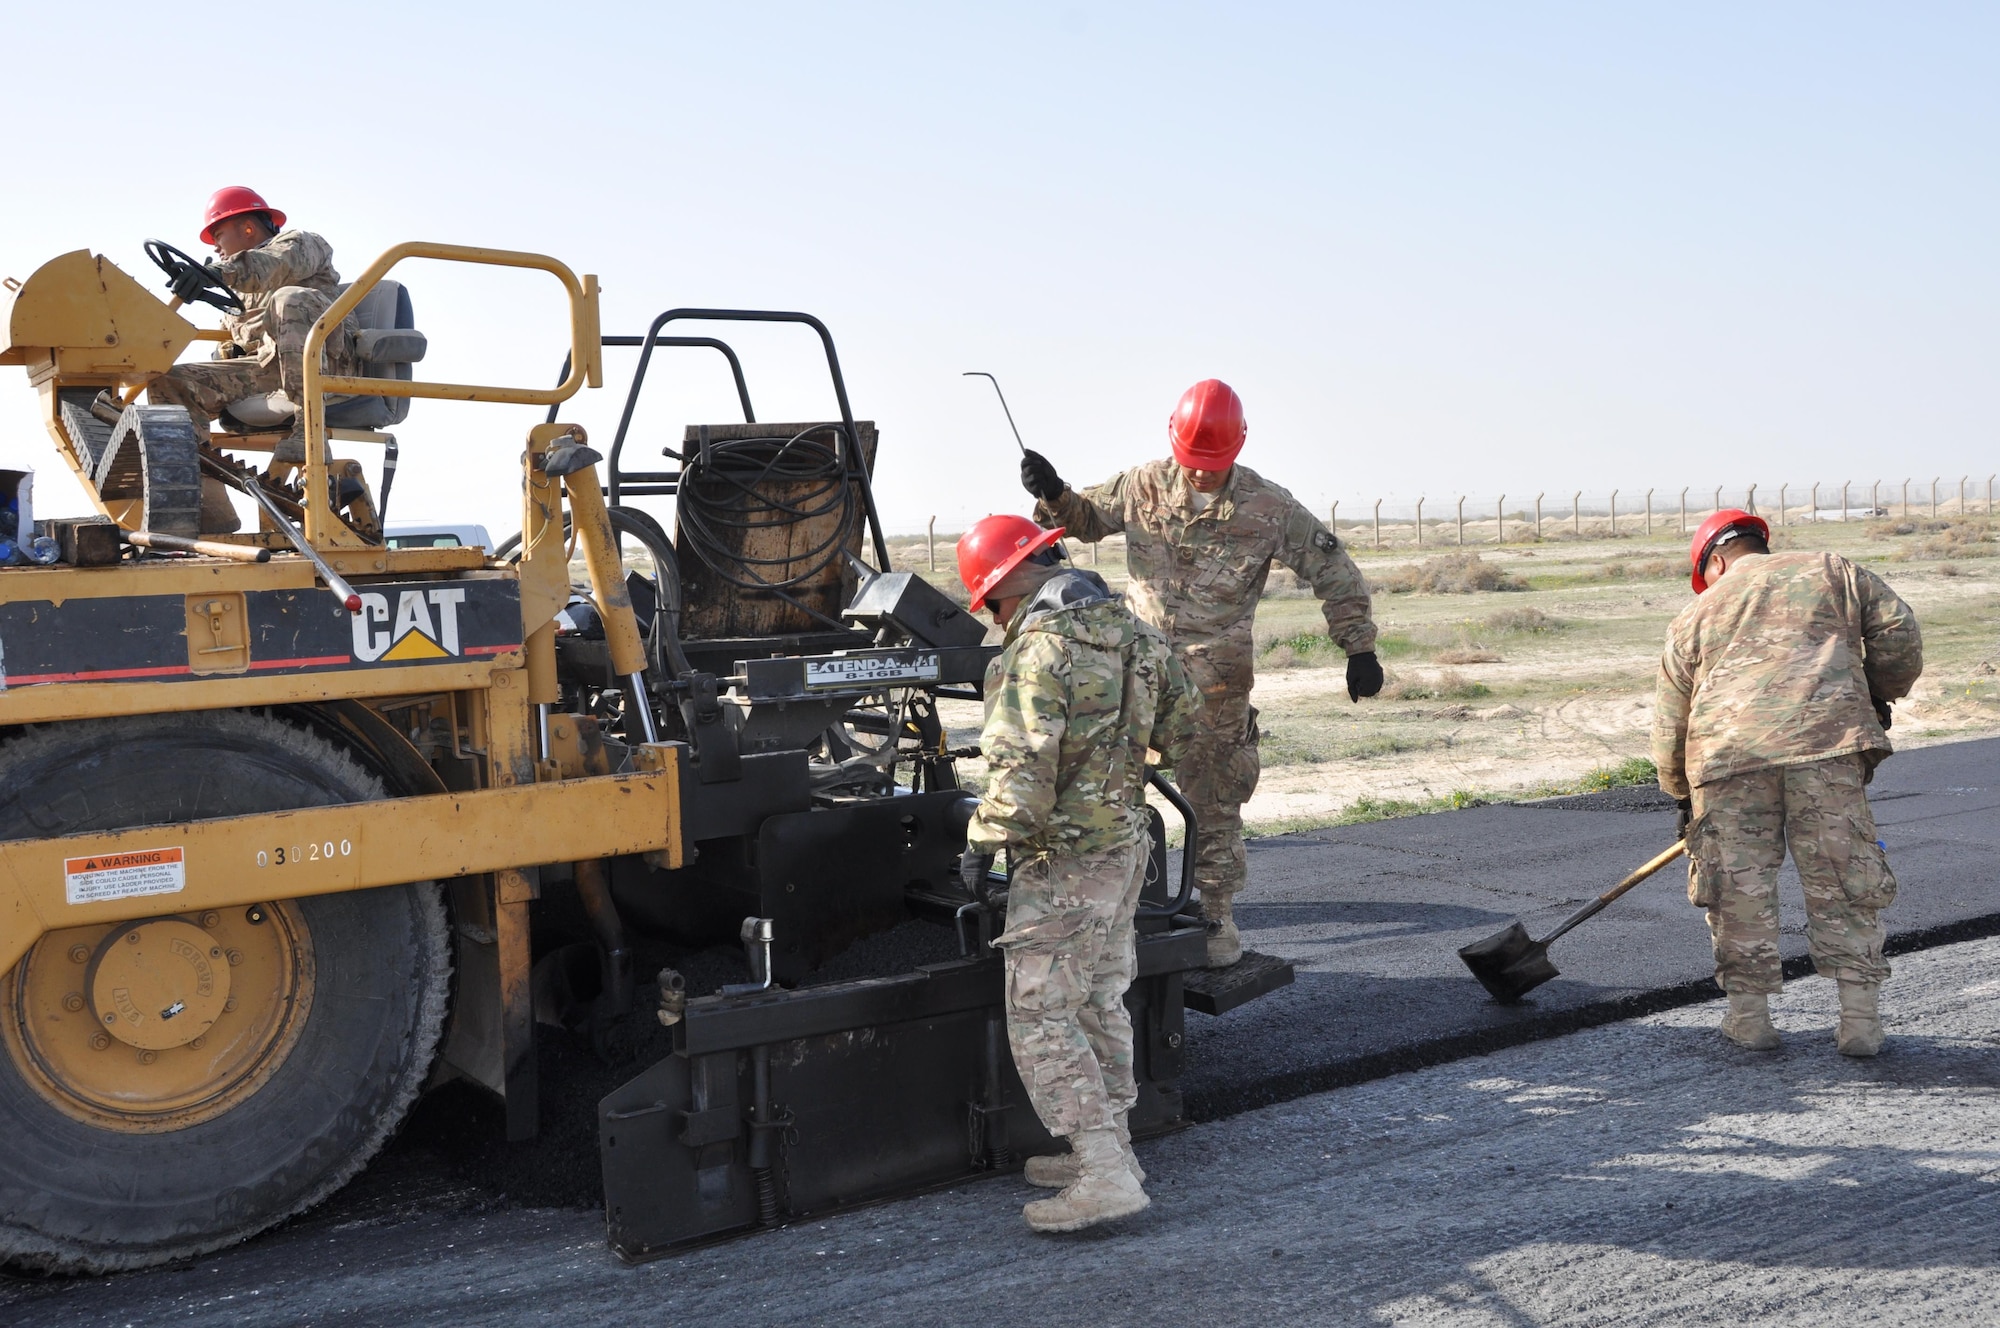 Members of the 557th Expeditionary Civil Engineers Group, Red Horse, construct a 2 mile long access road at an undisclosed location in Southwest Asia, January 20, 2016.  Red Horse personnel working this paving project are deployed from the 254th in Guam, Montana’s 219th, and the 210th out of New Mexico.  (U.S. Air Force photo by Master Sgt. Kevin Nichols)